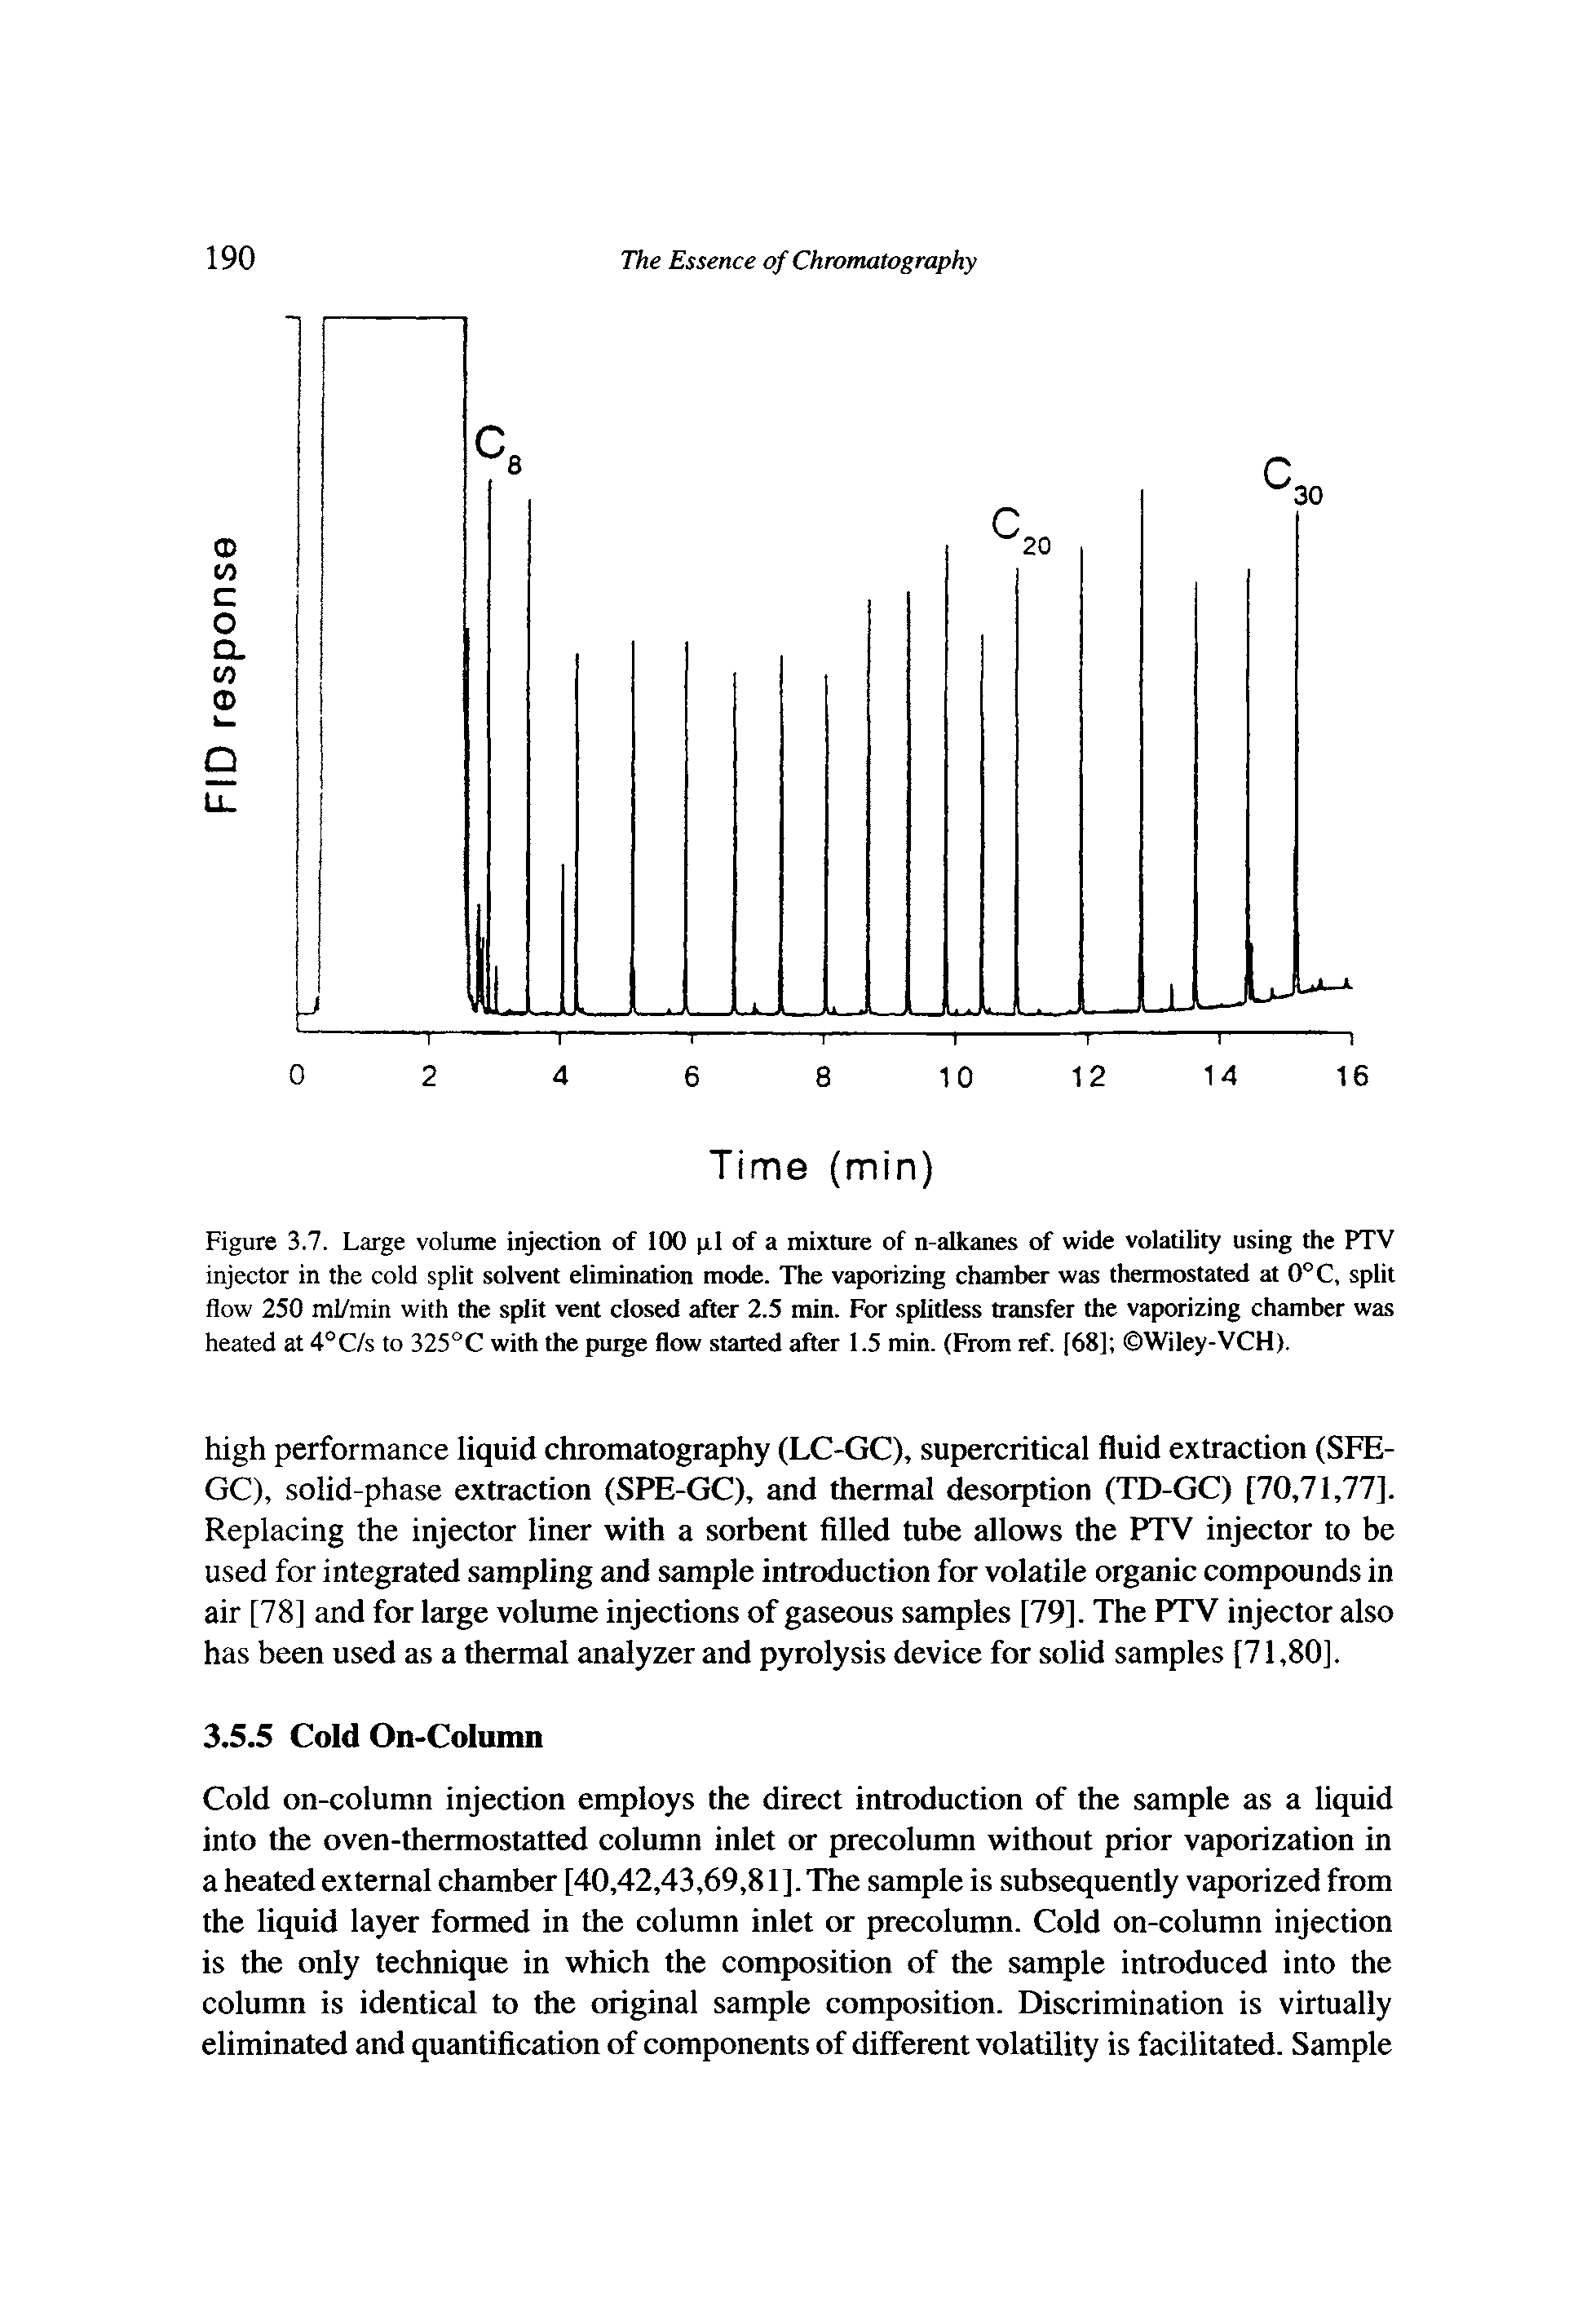 Figure 3.7. Large volume injection of 100 (il of a mixture of n-alkanes of wide volatility using the PTV injector in the cold split solvent elimination mode. The vaporizing chamber was thermostated at 0°C, split flow 250 ml/min with the split vent closed after 2.5 min. For splitless transfer the vaporizing chamber was heated at 4°C/s to 325°C with the puige flow started after 1.5 min. (From ref. [68] Wiley-VCH).